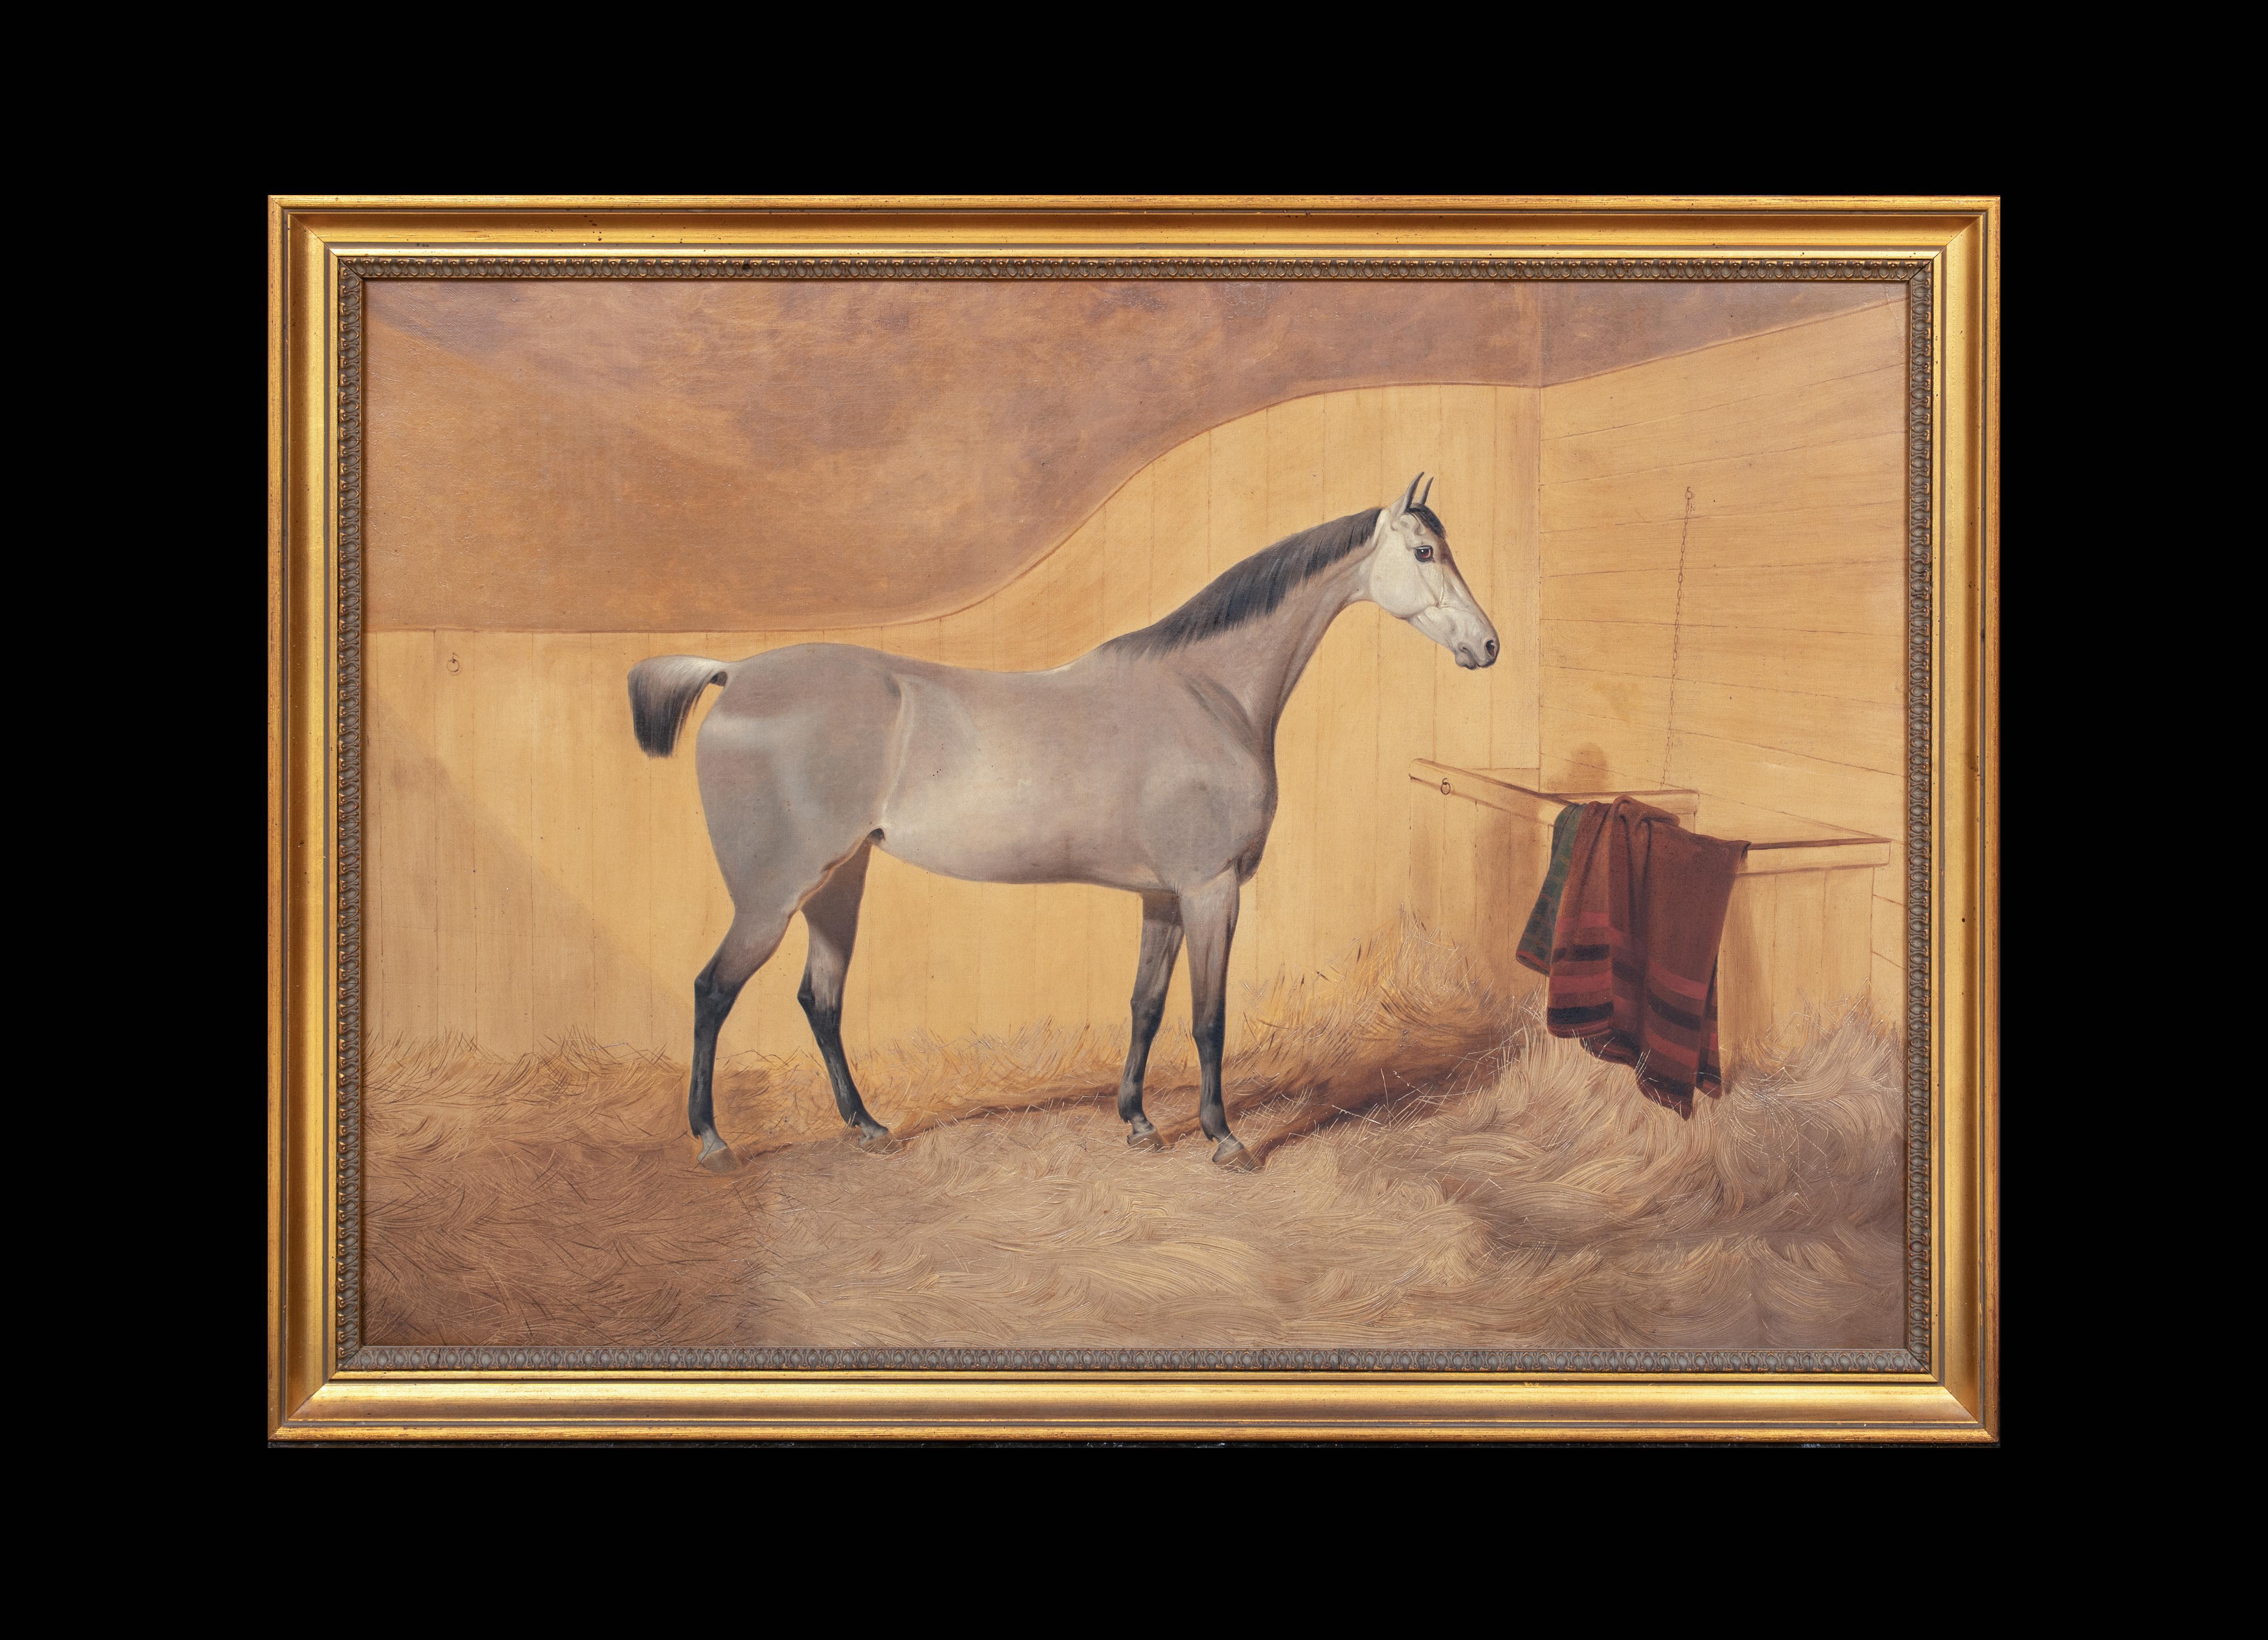 
Portrait Of A Grey Horse, 19th Century 

English School

Large 19th Century English School portrait of a grey horse in a stable, oil on canvas. Good quality and condition large scale study by an accomplished sporing equestrian painter circa 1870.